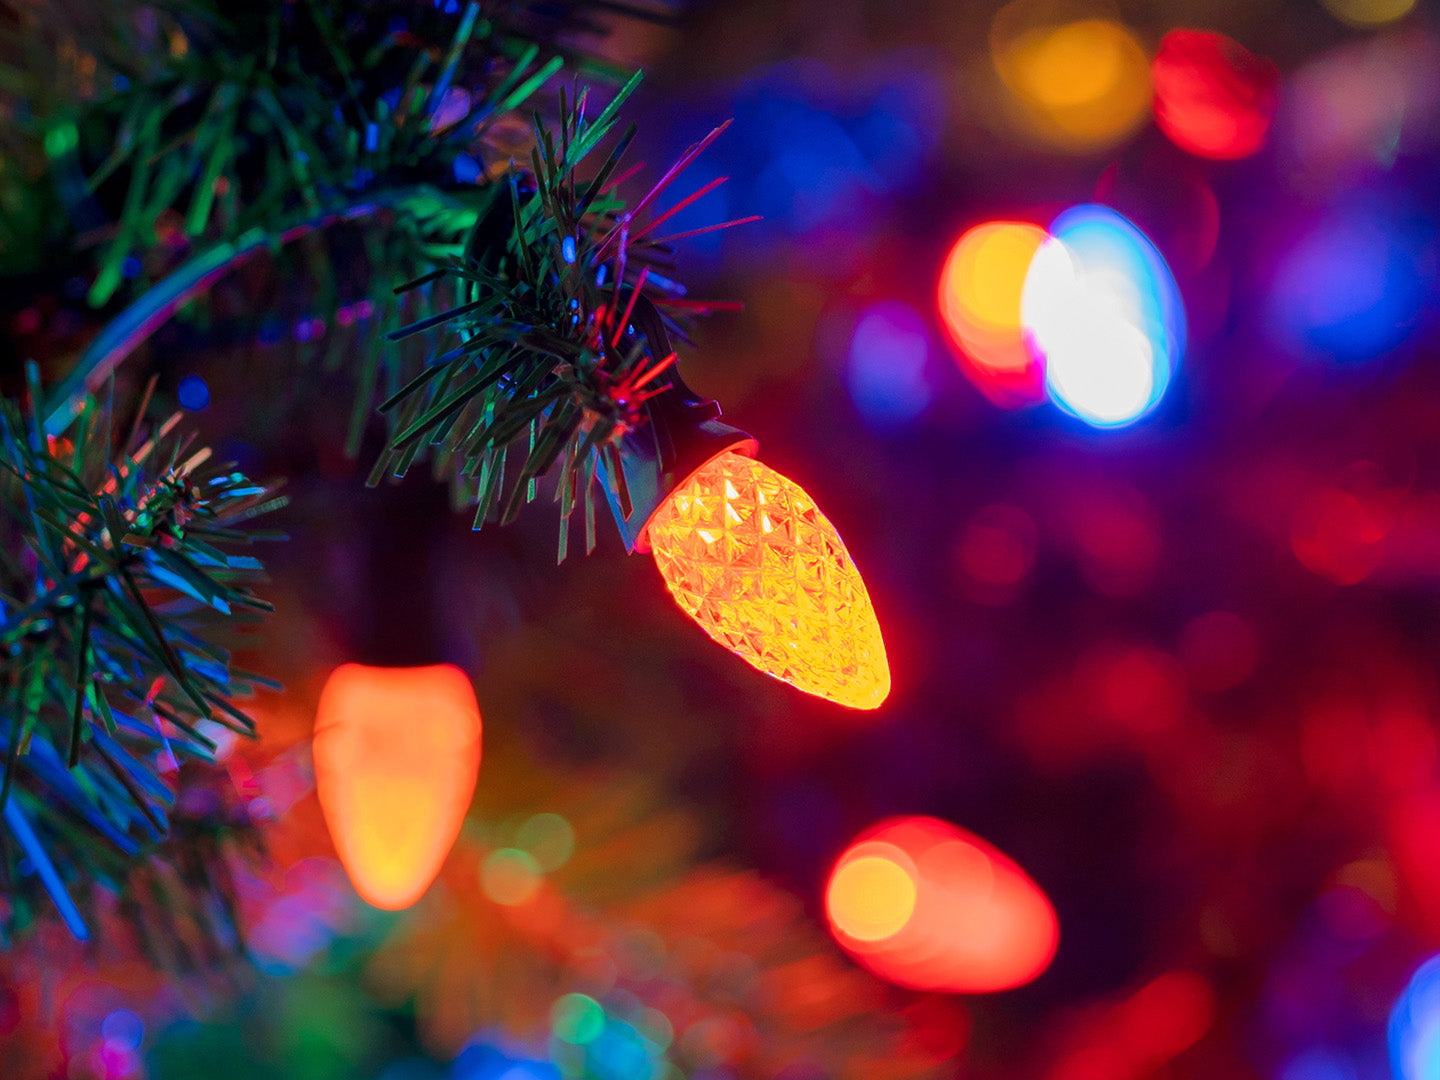 A close-up picture of an orange faceted C7 light bulb in a Christmas tree surrounded by blurred multicolor lights in the background.